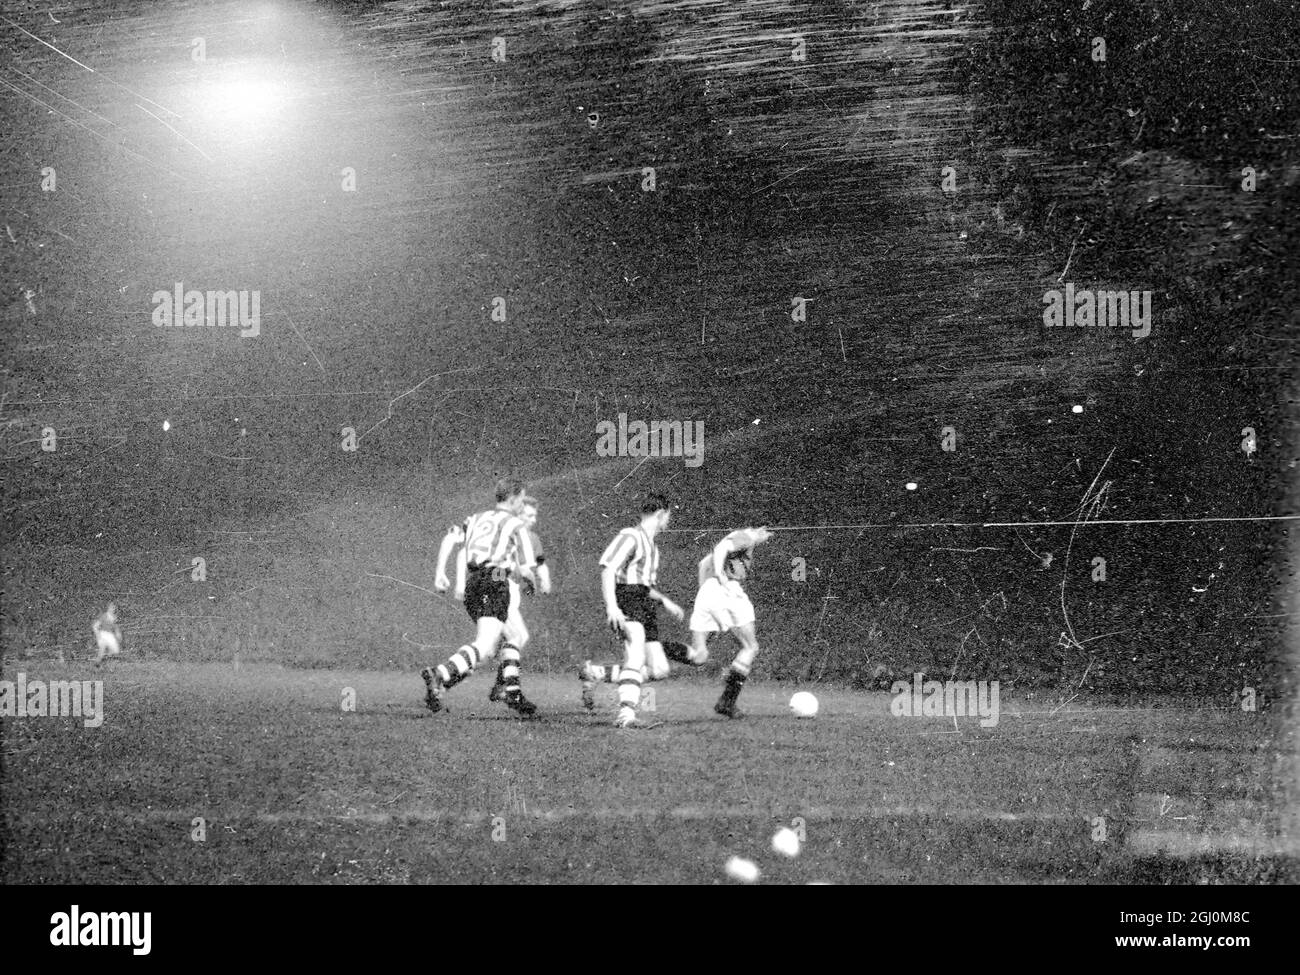 The Busby Babes make wonderful come back in their first match since Munich The new Manchester United Captain Billy Foulkes and his team at the Old Trafford Ground last night for the cup match against Sheffield Wednesday He and Harry Gregg the only Manchester United players of the original team to take the field following the tragic crash and famous referee Alf Bond 20 February 1958 Stock Photo